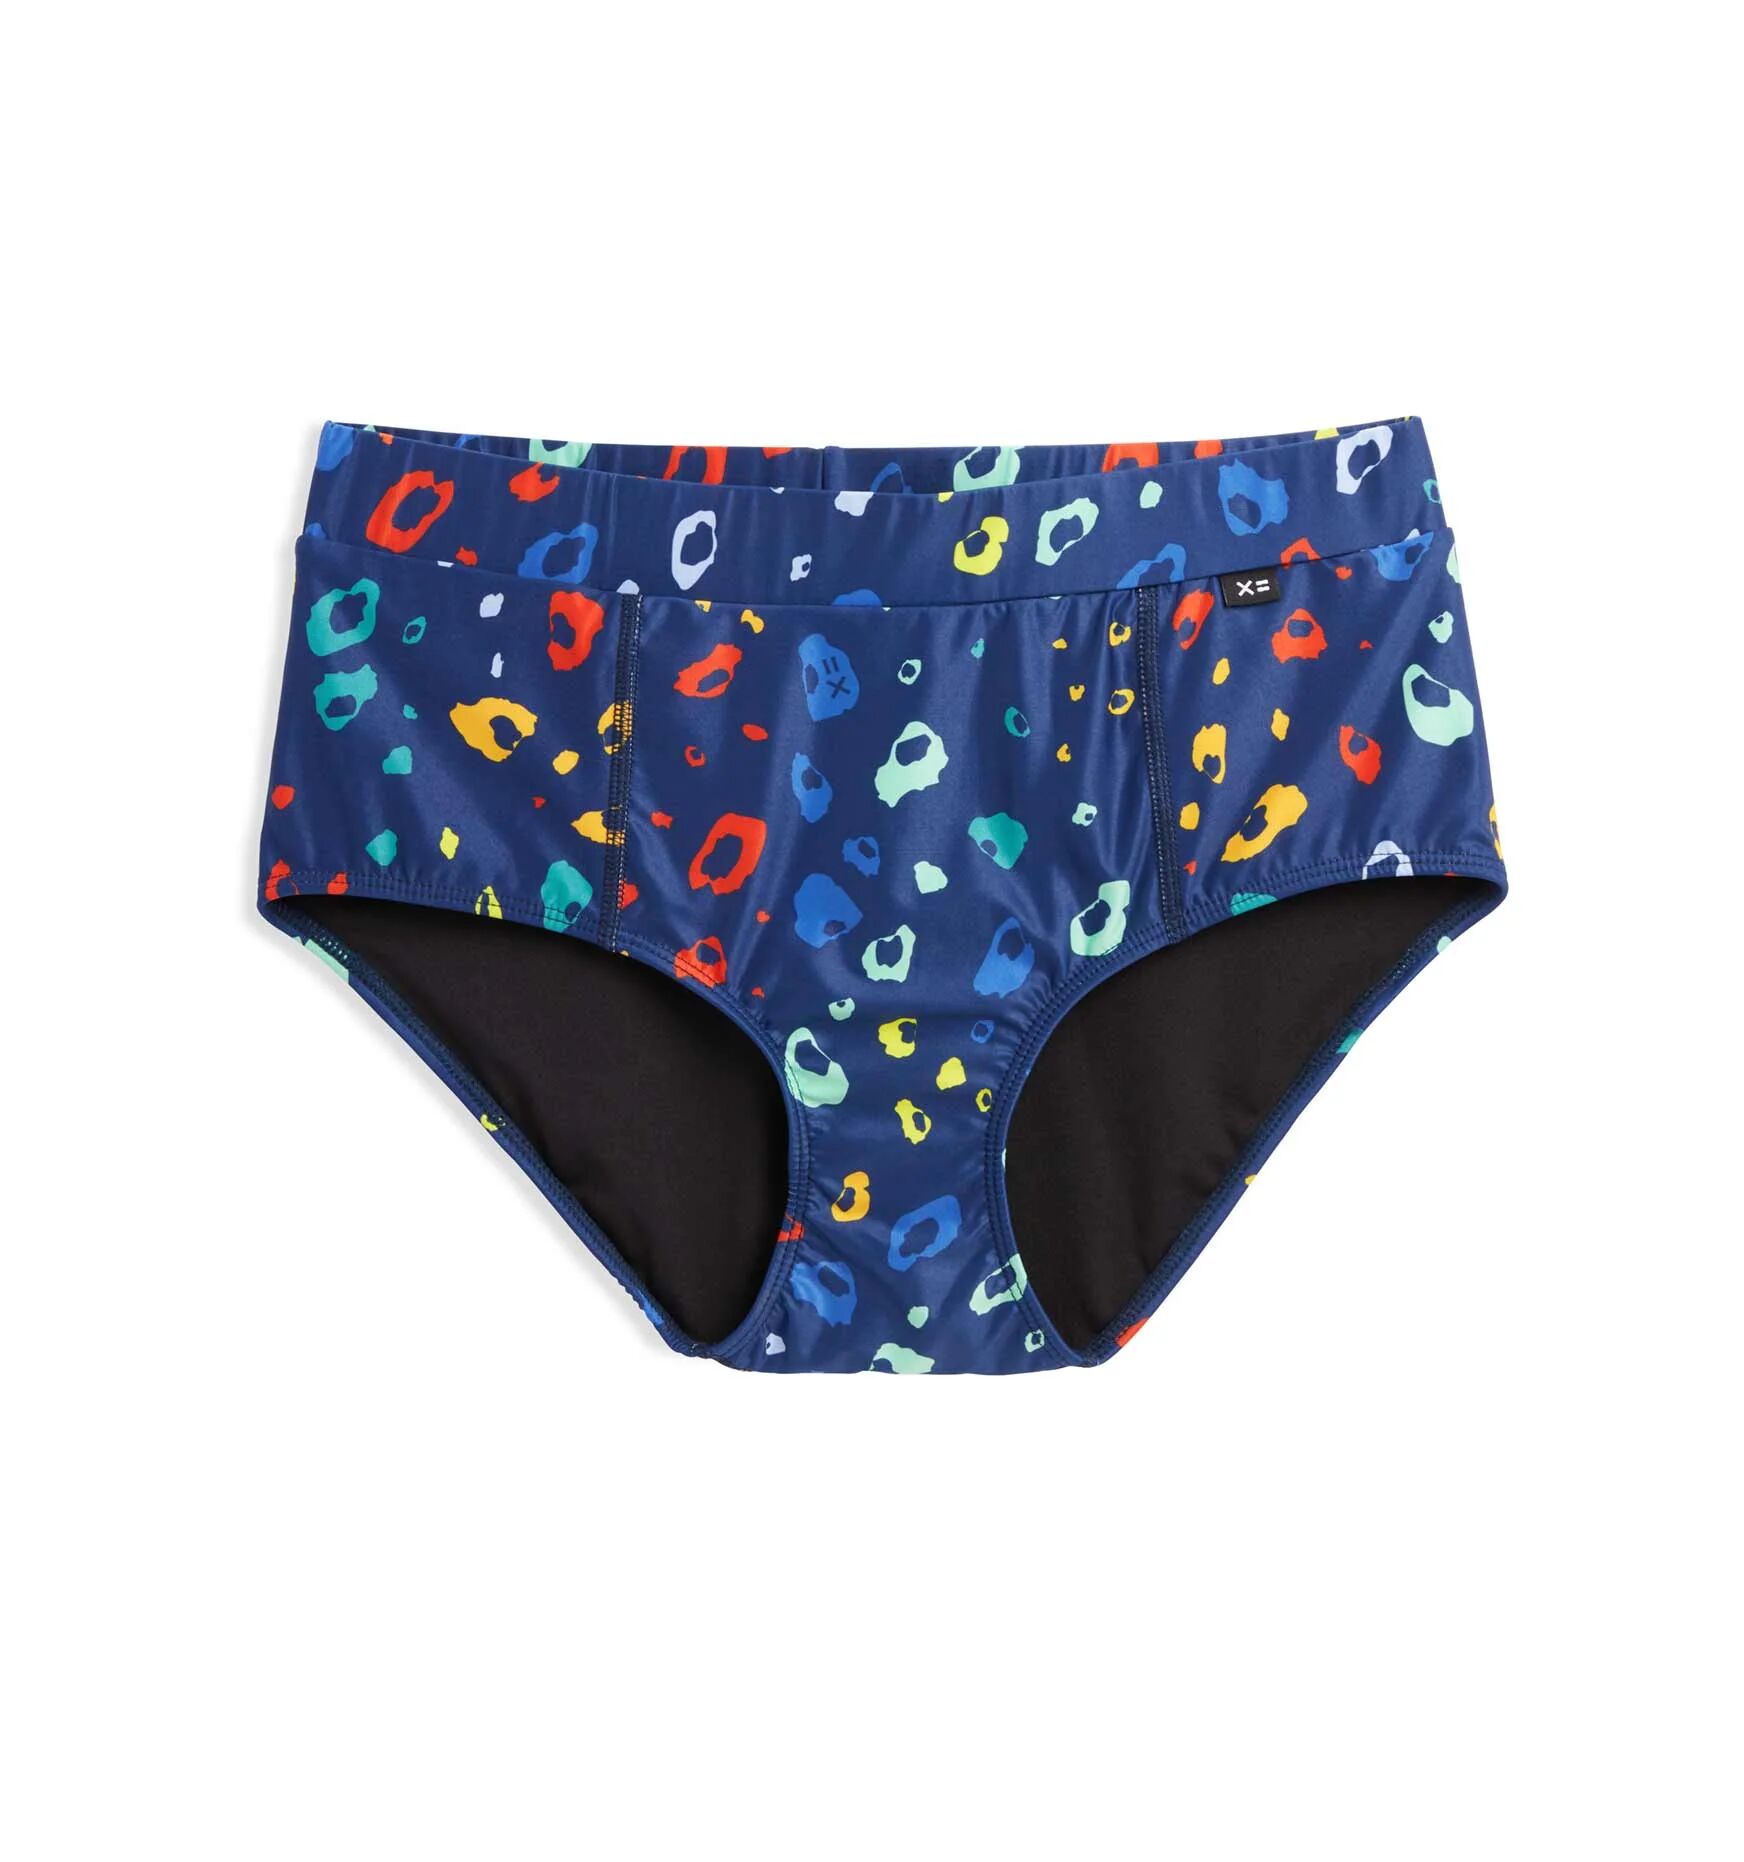 TomboyX Swim High Waisted HIpster LC - Poppin' Bubbles - Poppin' Bubbles - Size: LG